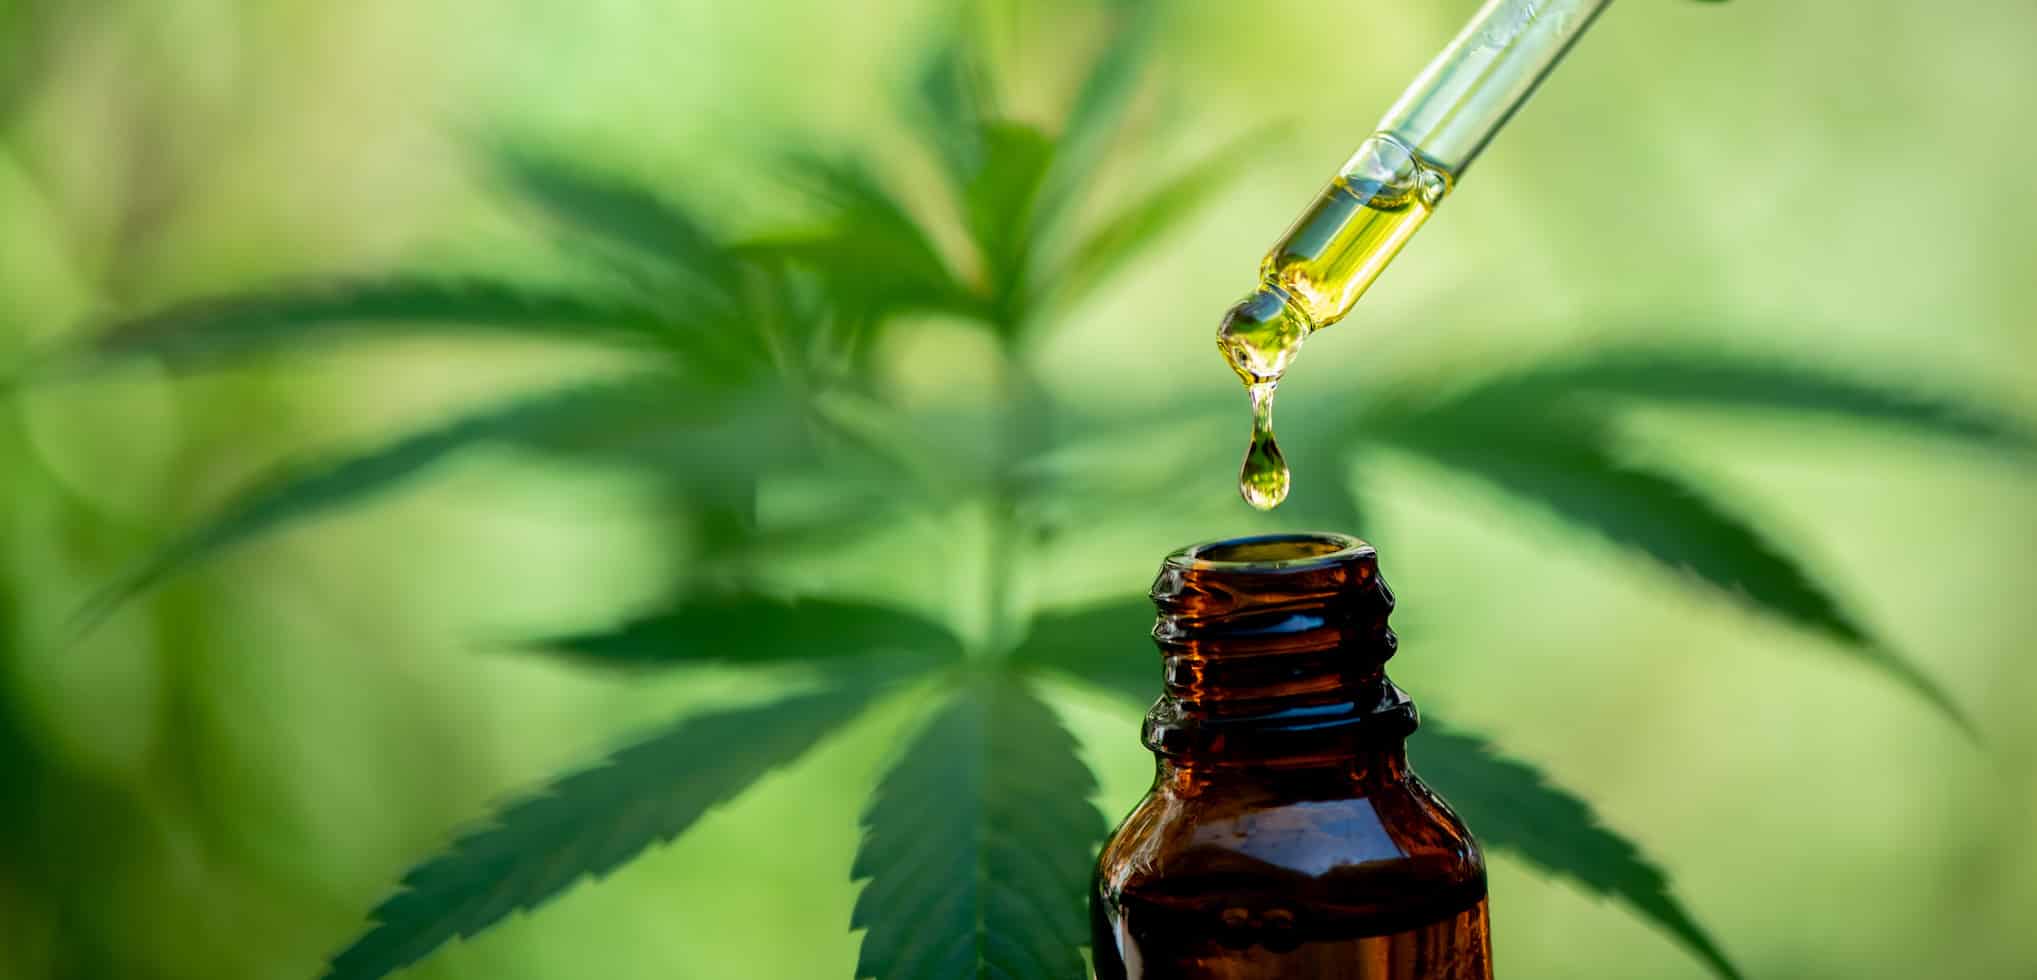 Why More Psychoactive Results for THC than CBD?